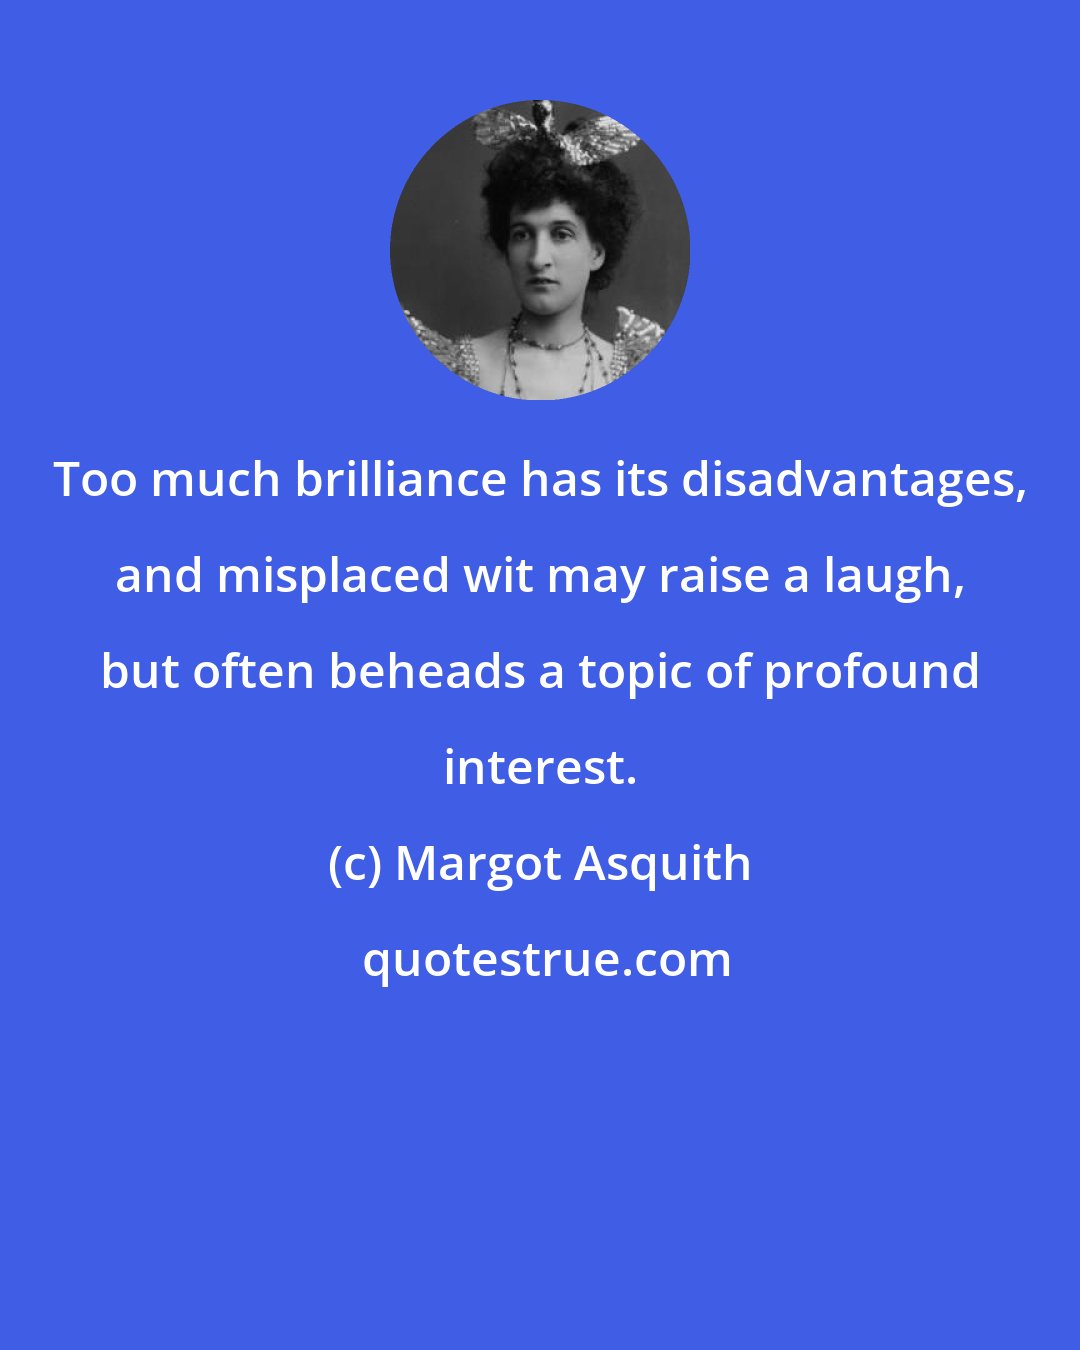 Margot Asquith: Too much brilliance has its disadvantages, and misplaced wit may raise a laugh, but often beheads a topic of profound interest.